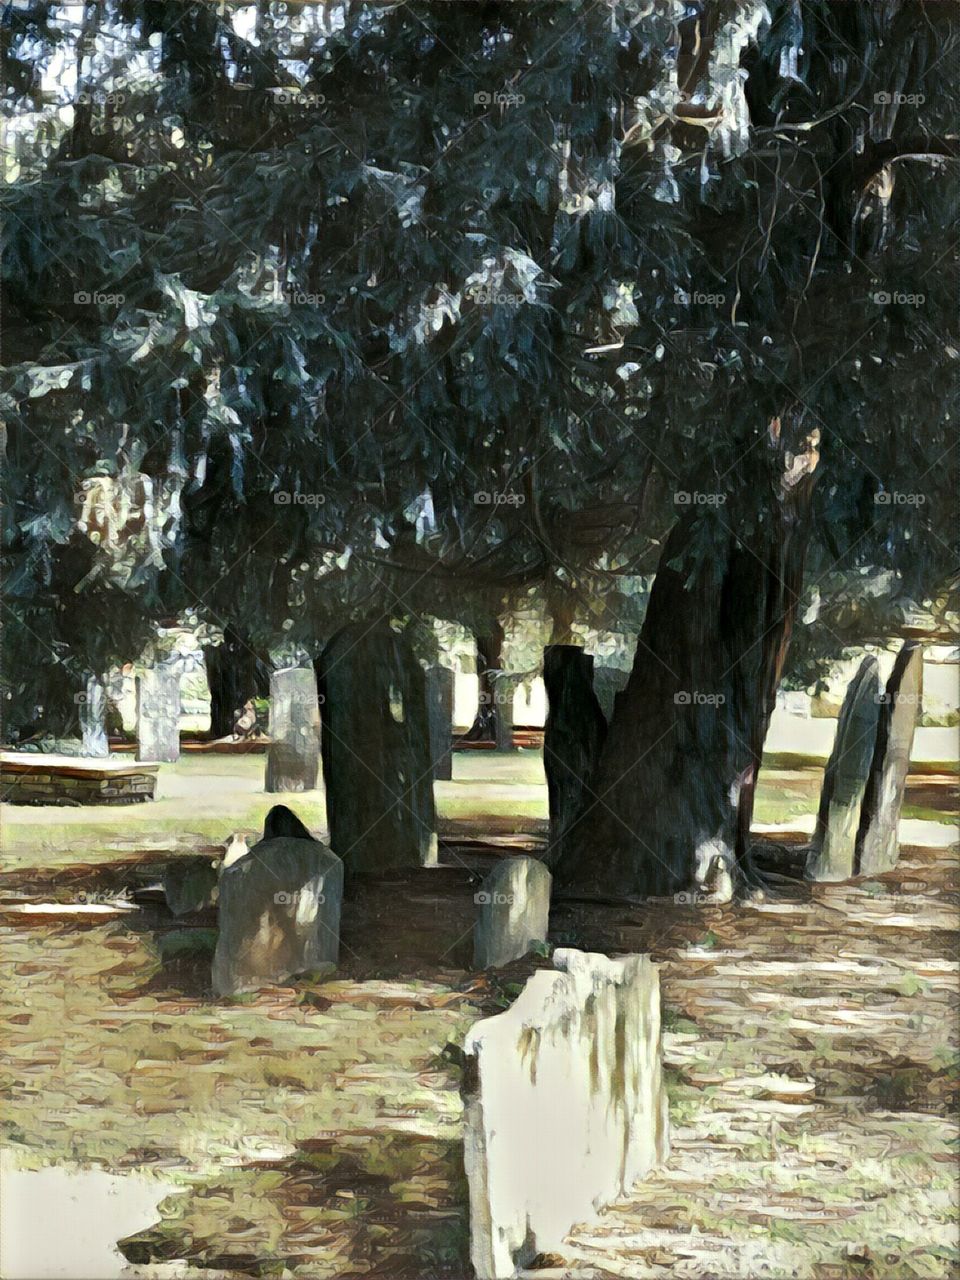 Graveyard in the trees